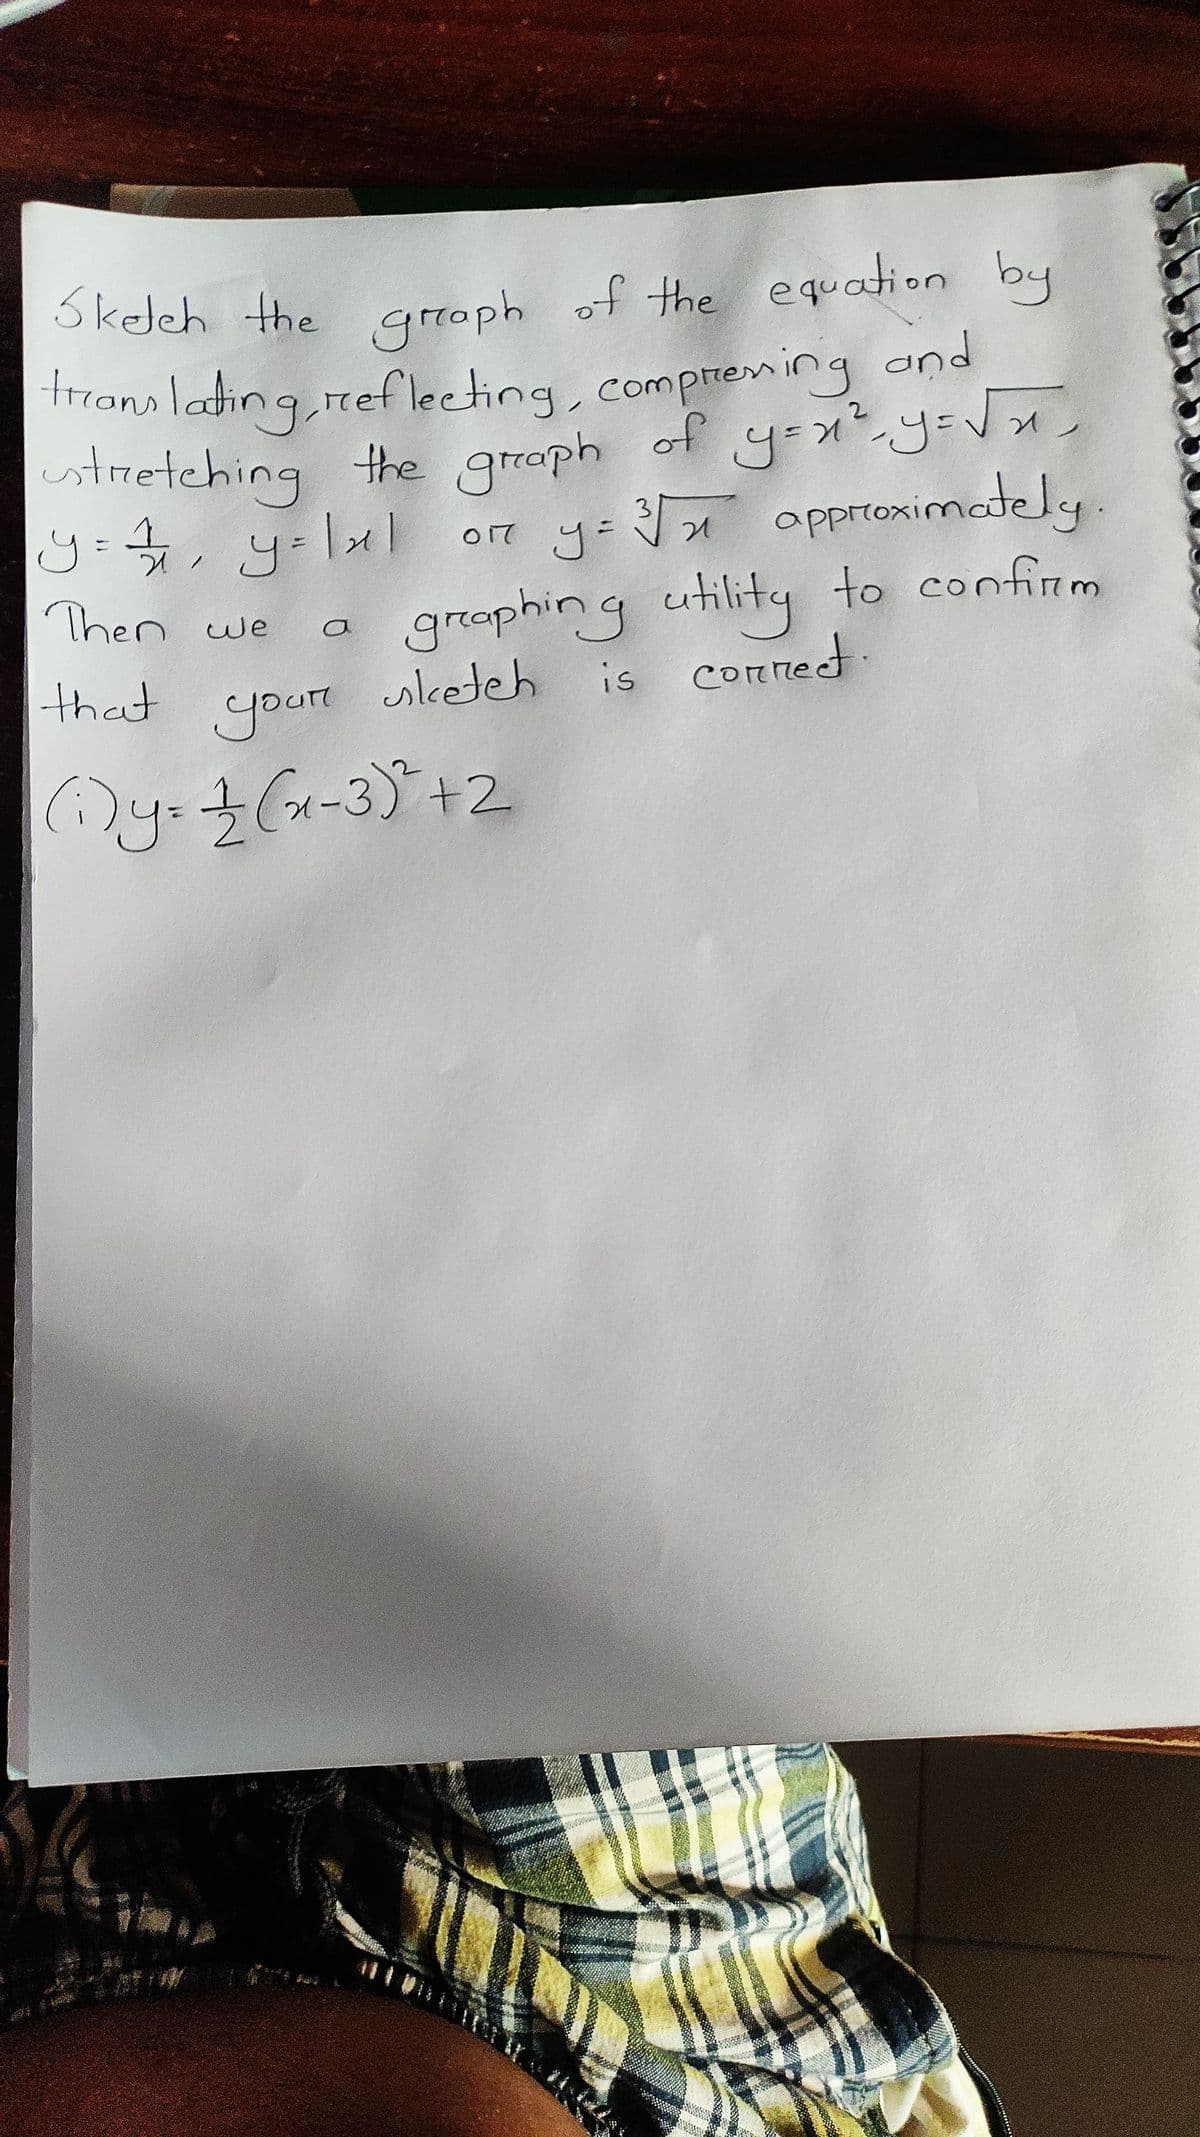 Sketch the rroph of the equation by
Trans lating nefleeting, compreming and
stretching the groph
2.
of
3
ore y-
approximately.
grophing utility to confirm
sketeh
Then we
that
is cornedt
your
